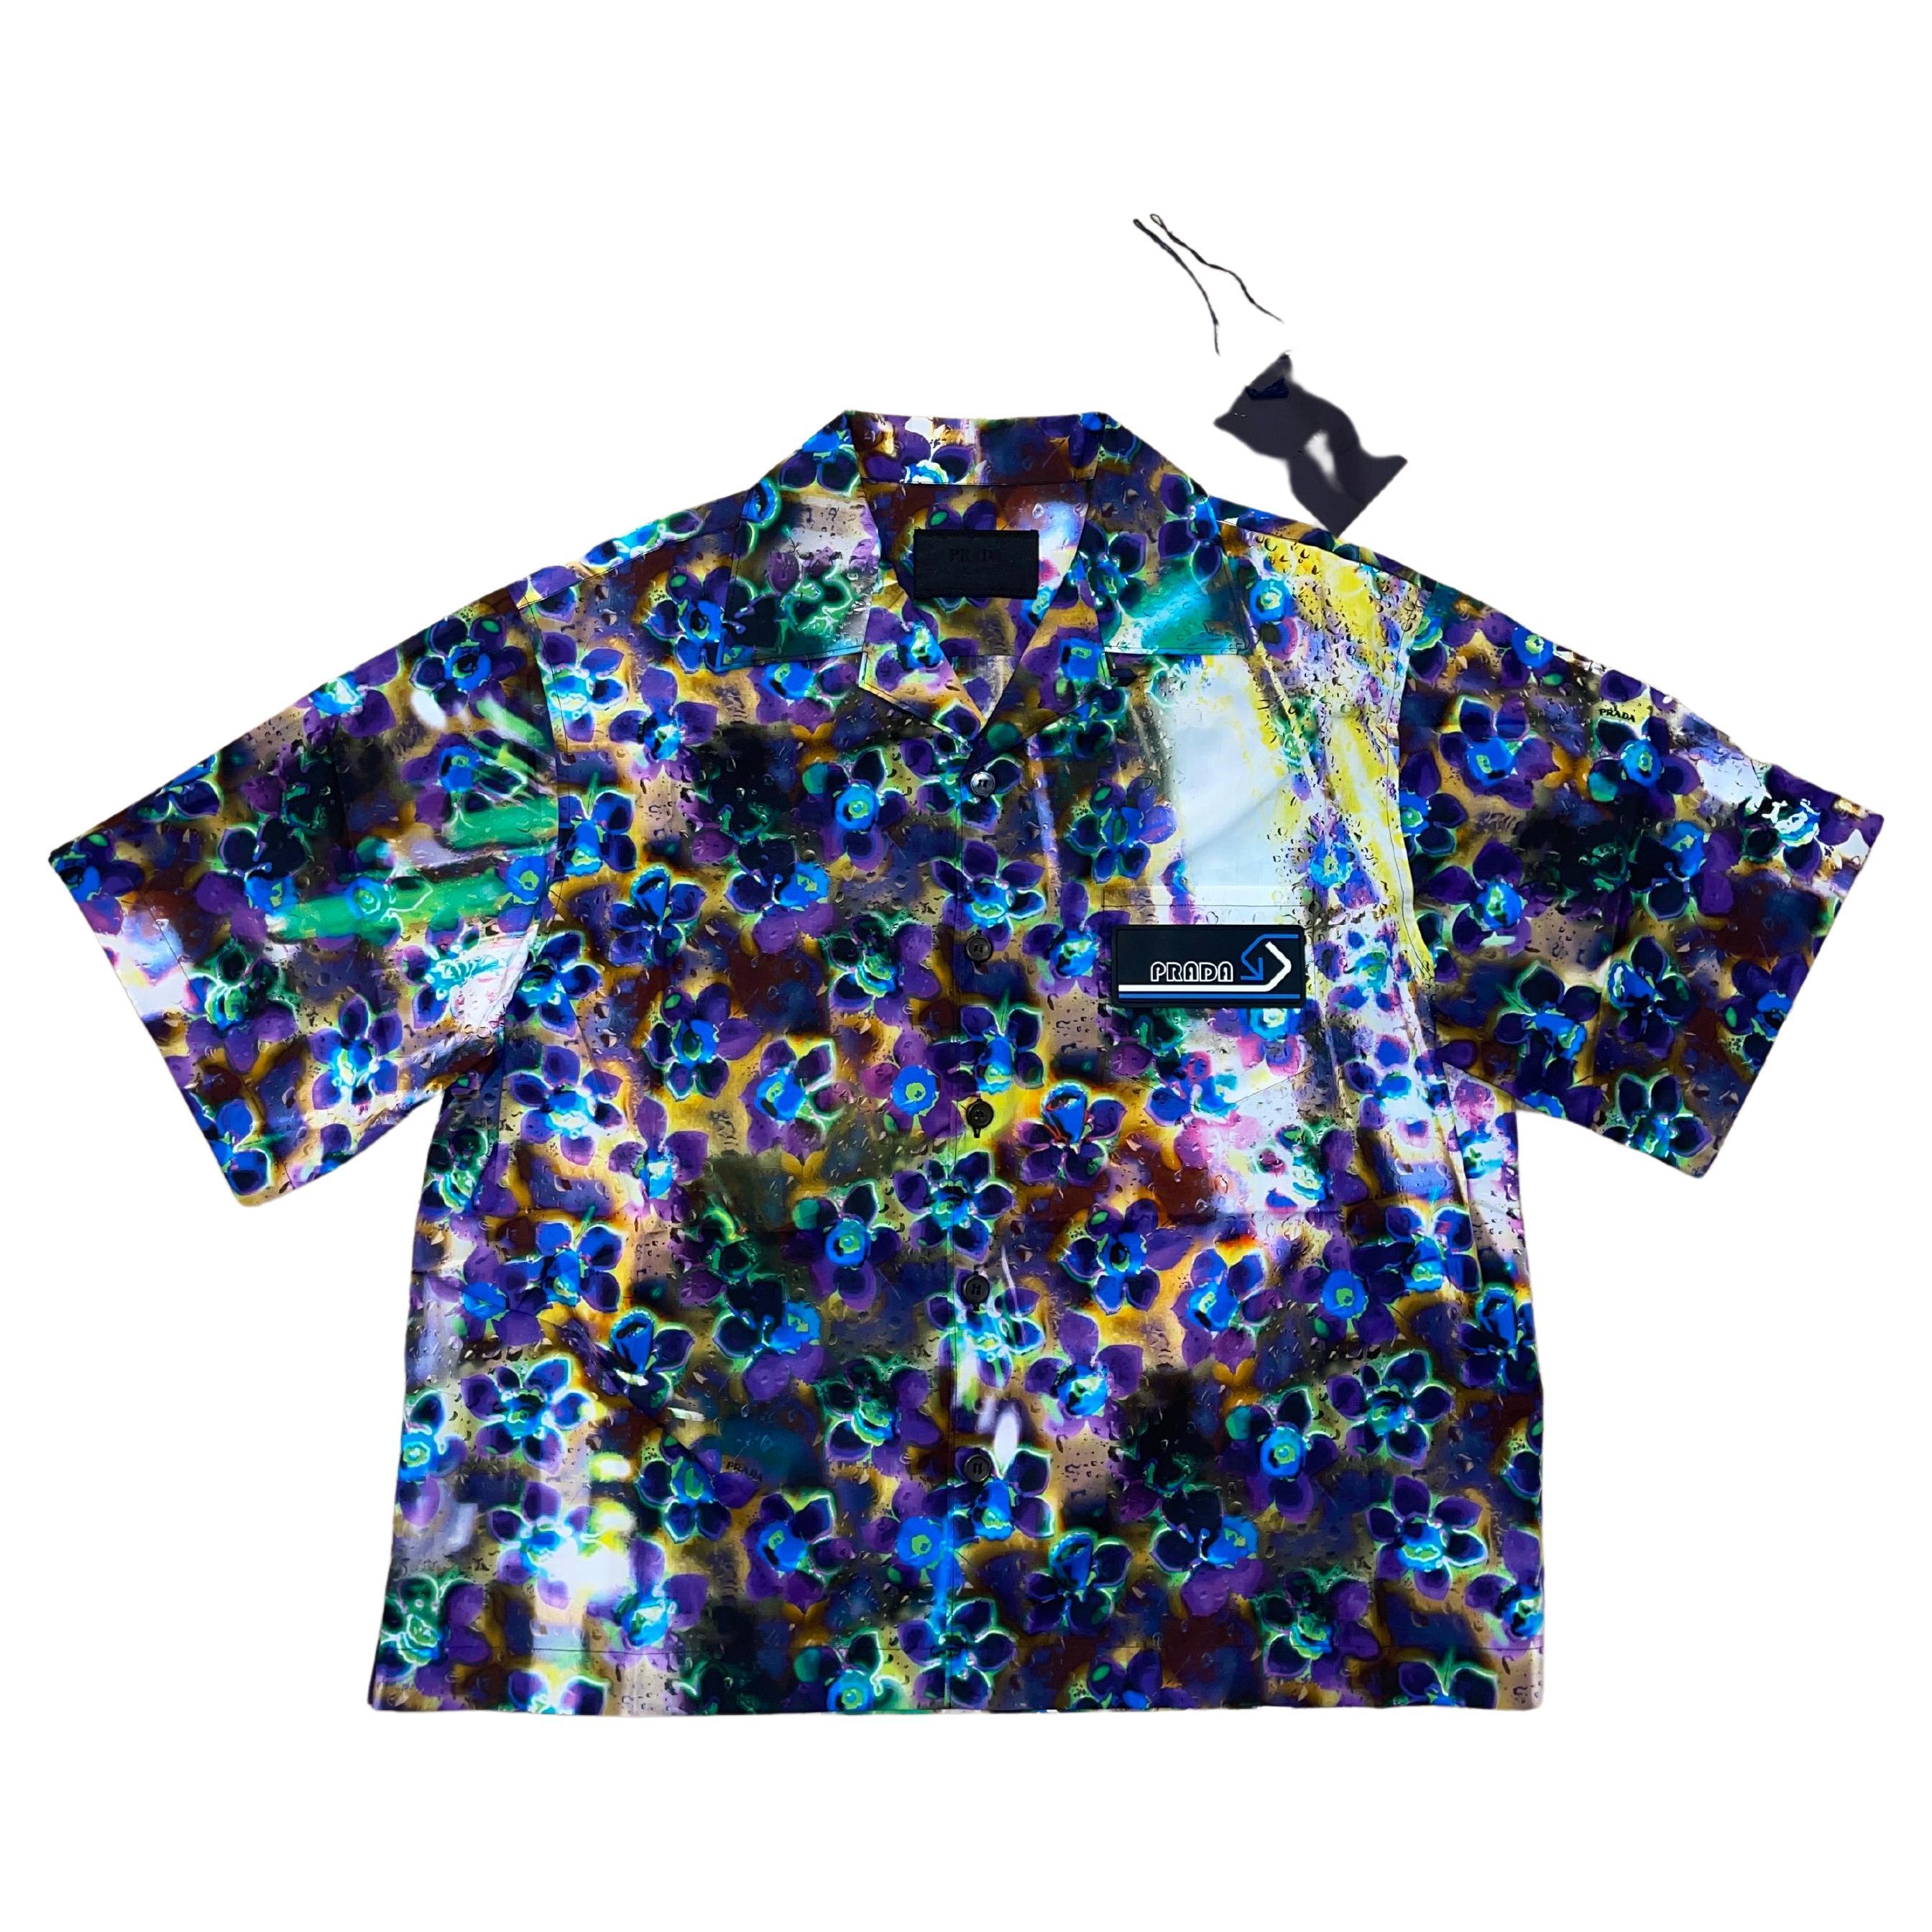 Prada 2018 Liquid Floral Daisy Bowling Button Up Shirt size Large For Sale